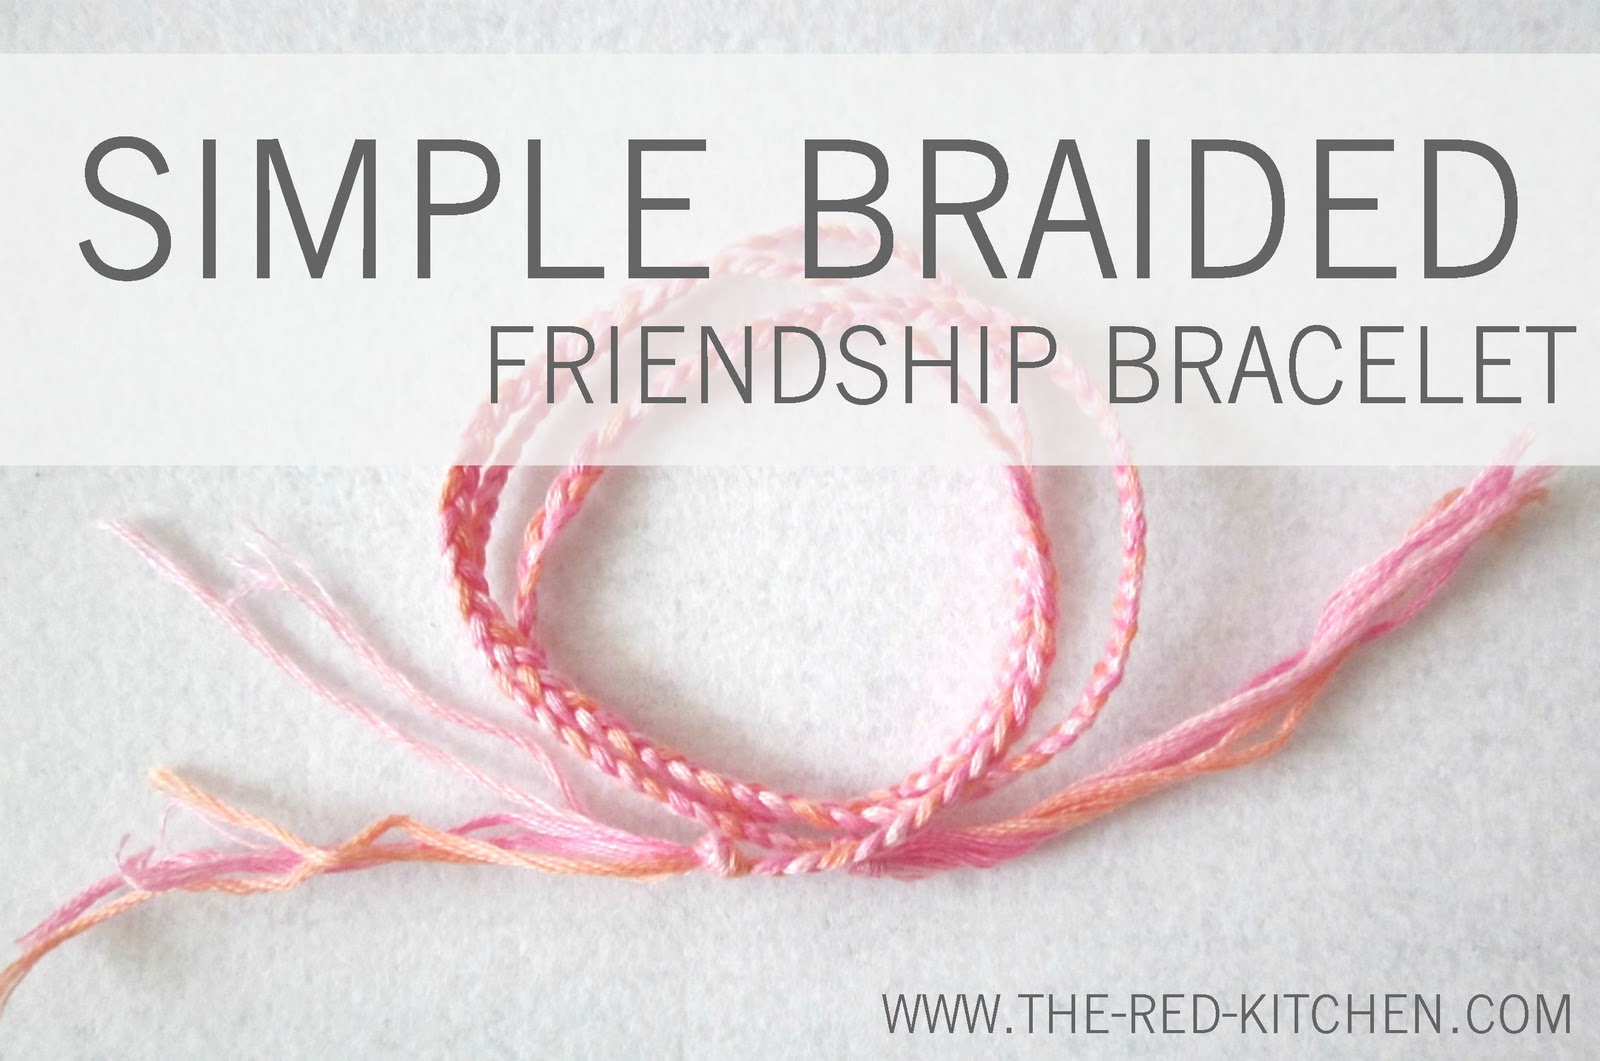 Embroidery Floss Bracelet Patterns The Red Kitchen Simple Braided Friendship Bracelet A Tutorial In